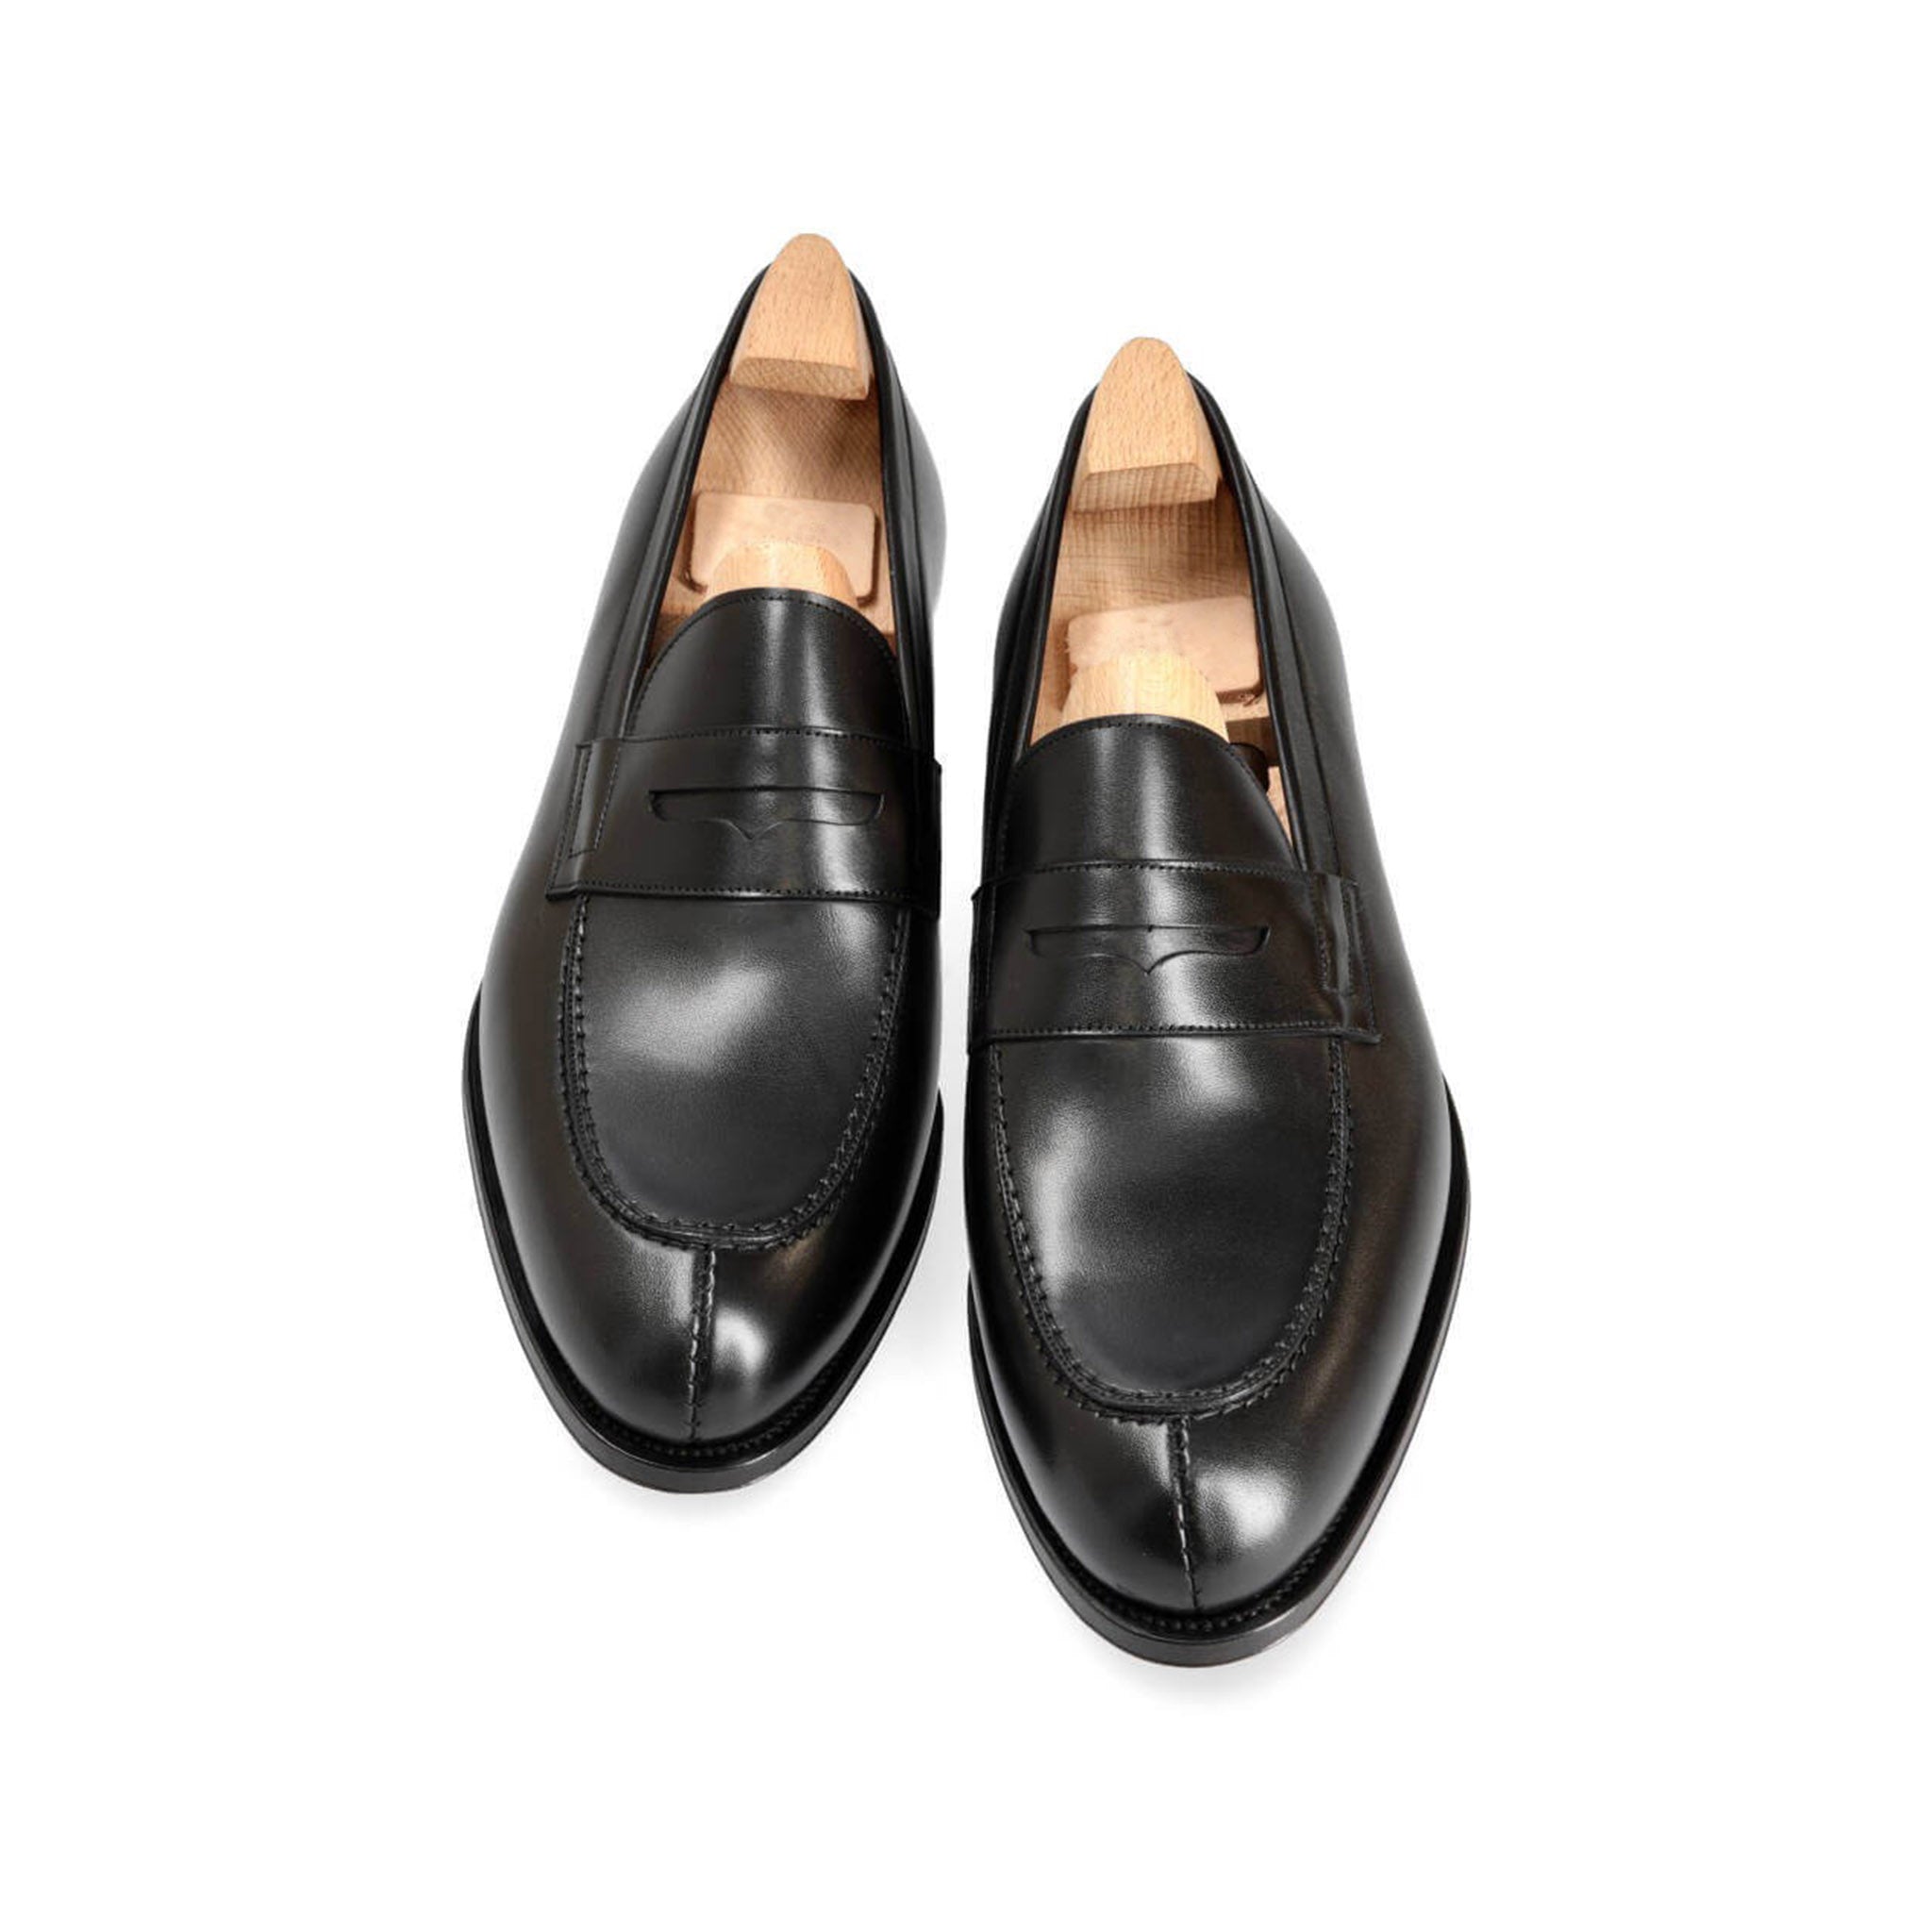 Coal Boxcalf Penny Loafers